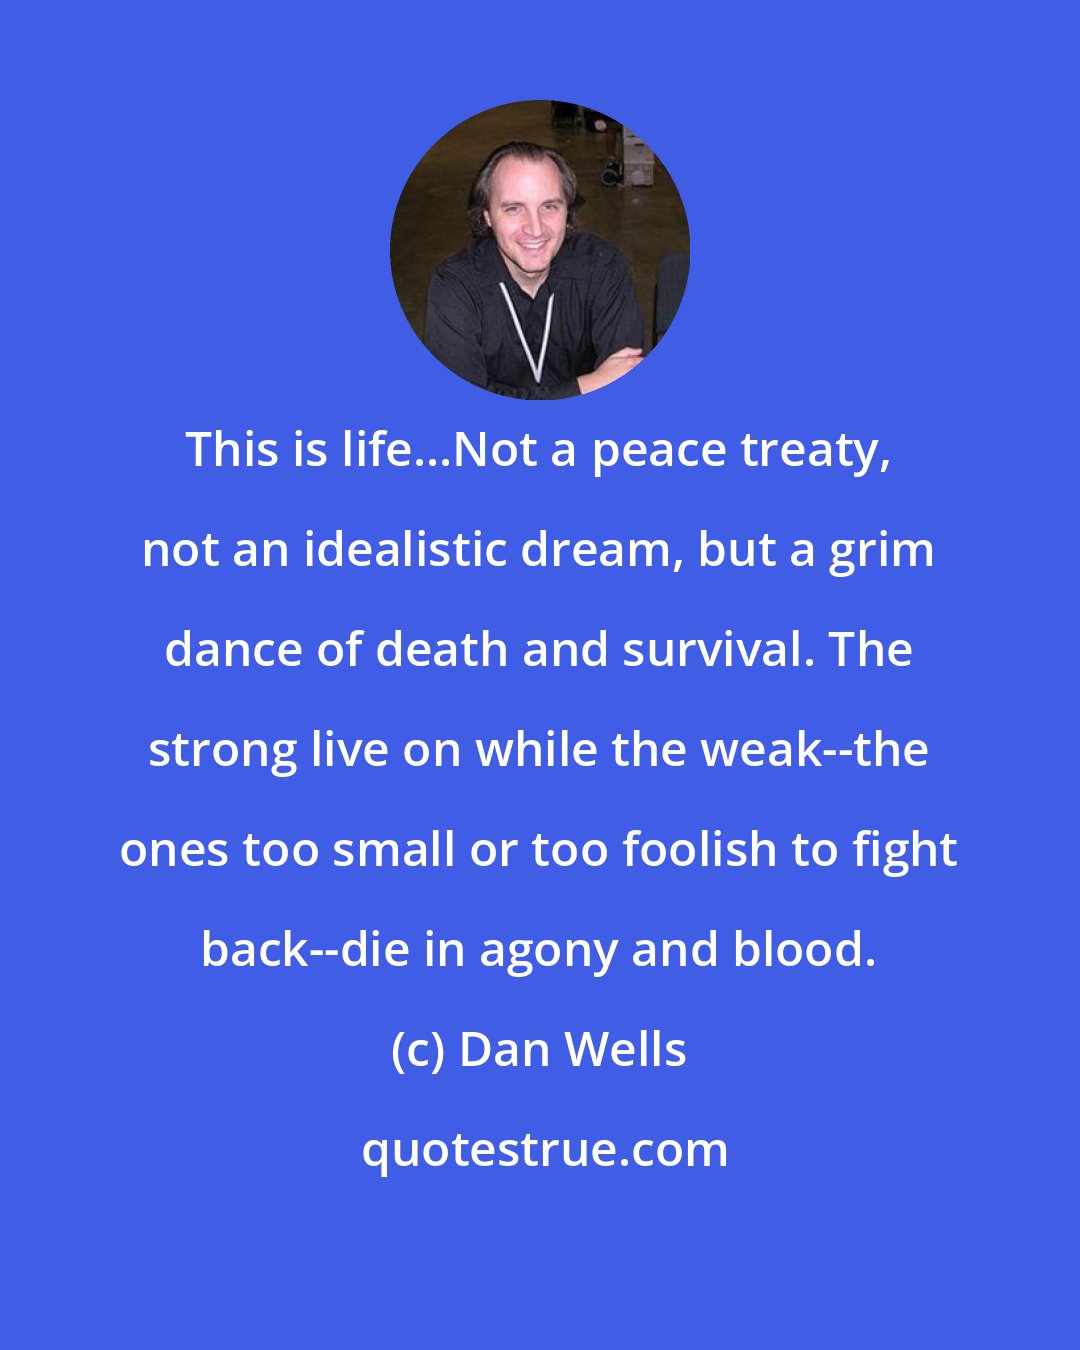 Dan Wells: This is life...Not a peace treaty, not an idealistic dream, but a grim dance of death and survival. The strong live on while the weak--the ones too small or too foolish to fight back--die in agony and blood.